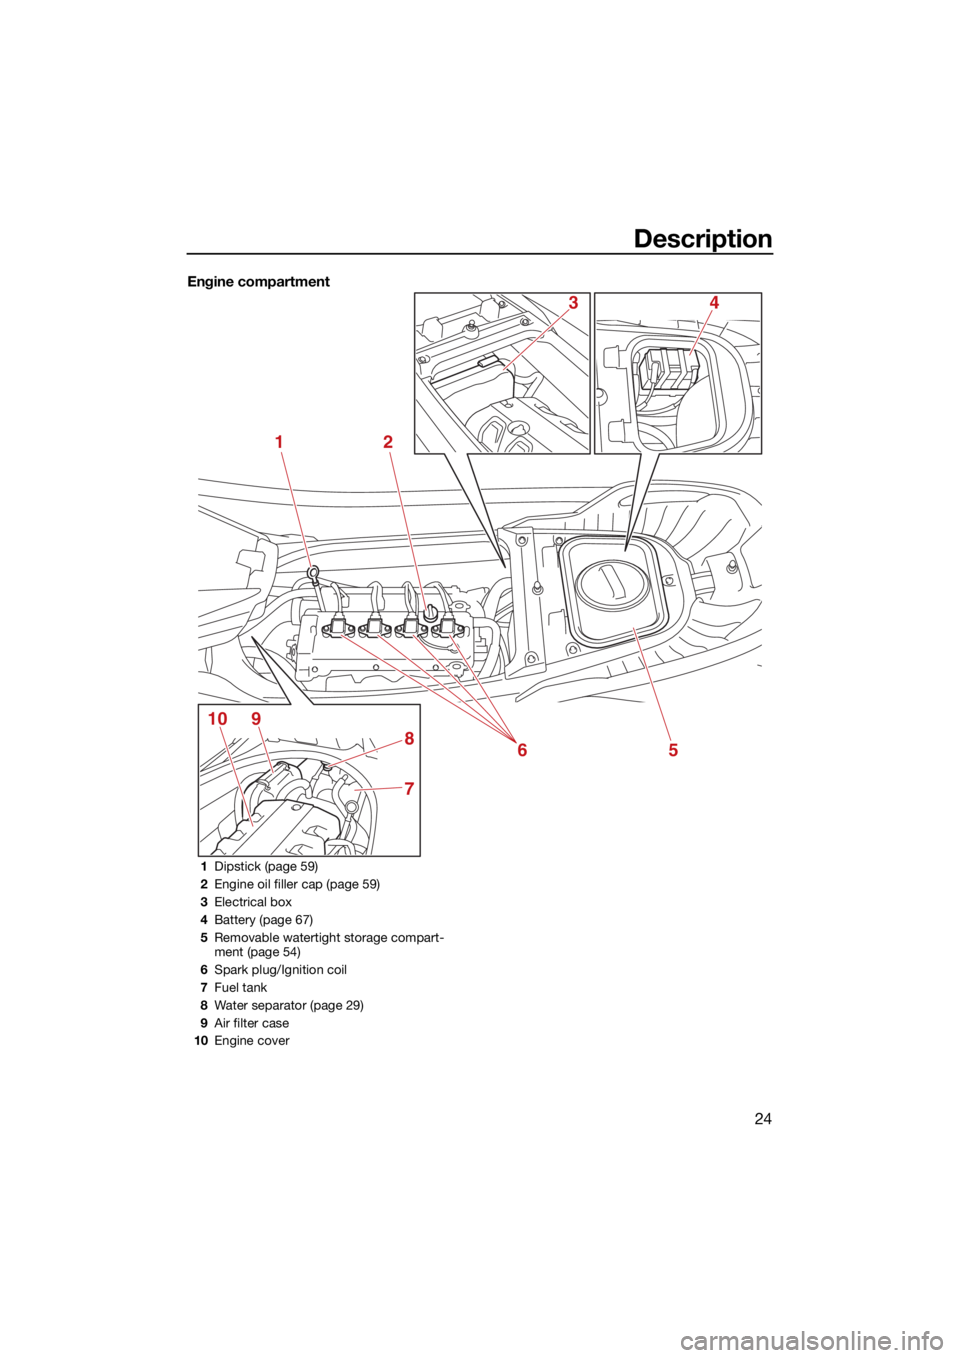 YAMAHA FX HO 2021 Owners Guide Description
24
Engine compartment
12
5
7
8
9106
43
1Dipstick (page 59)
2 Engine oil filler cap (page 59)
3 Electrical box
4 Battery (page 67)
5 Removable watertight storage compart-
ment (page 54)
6 S